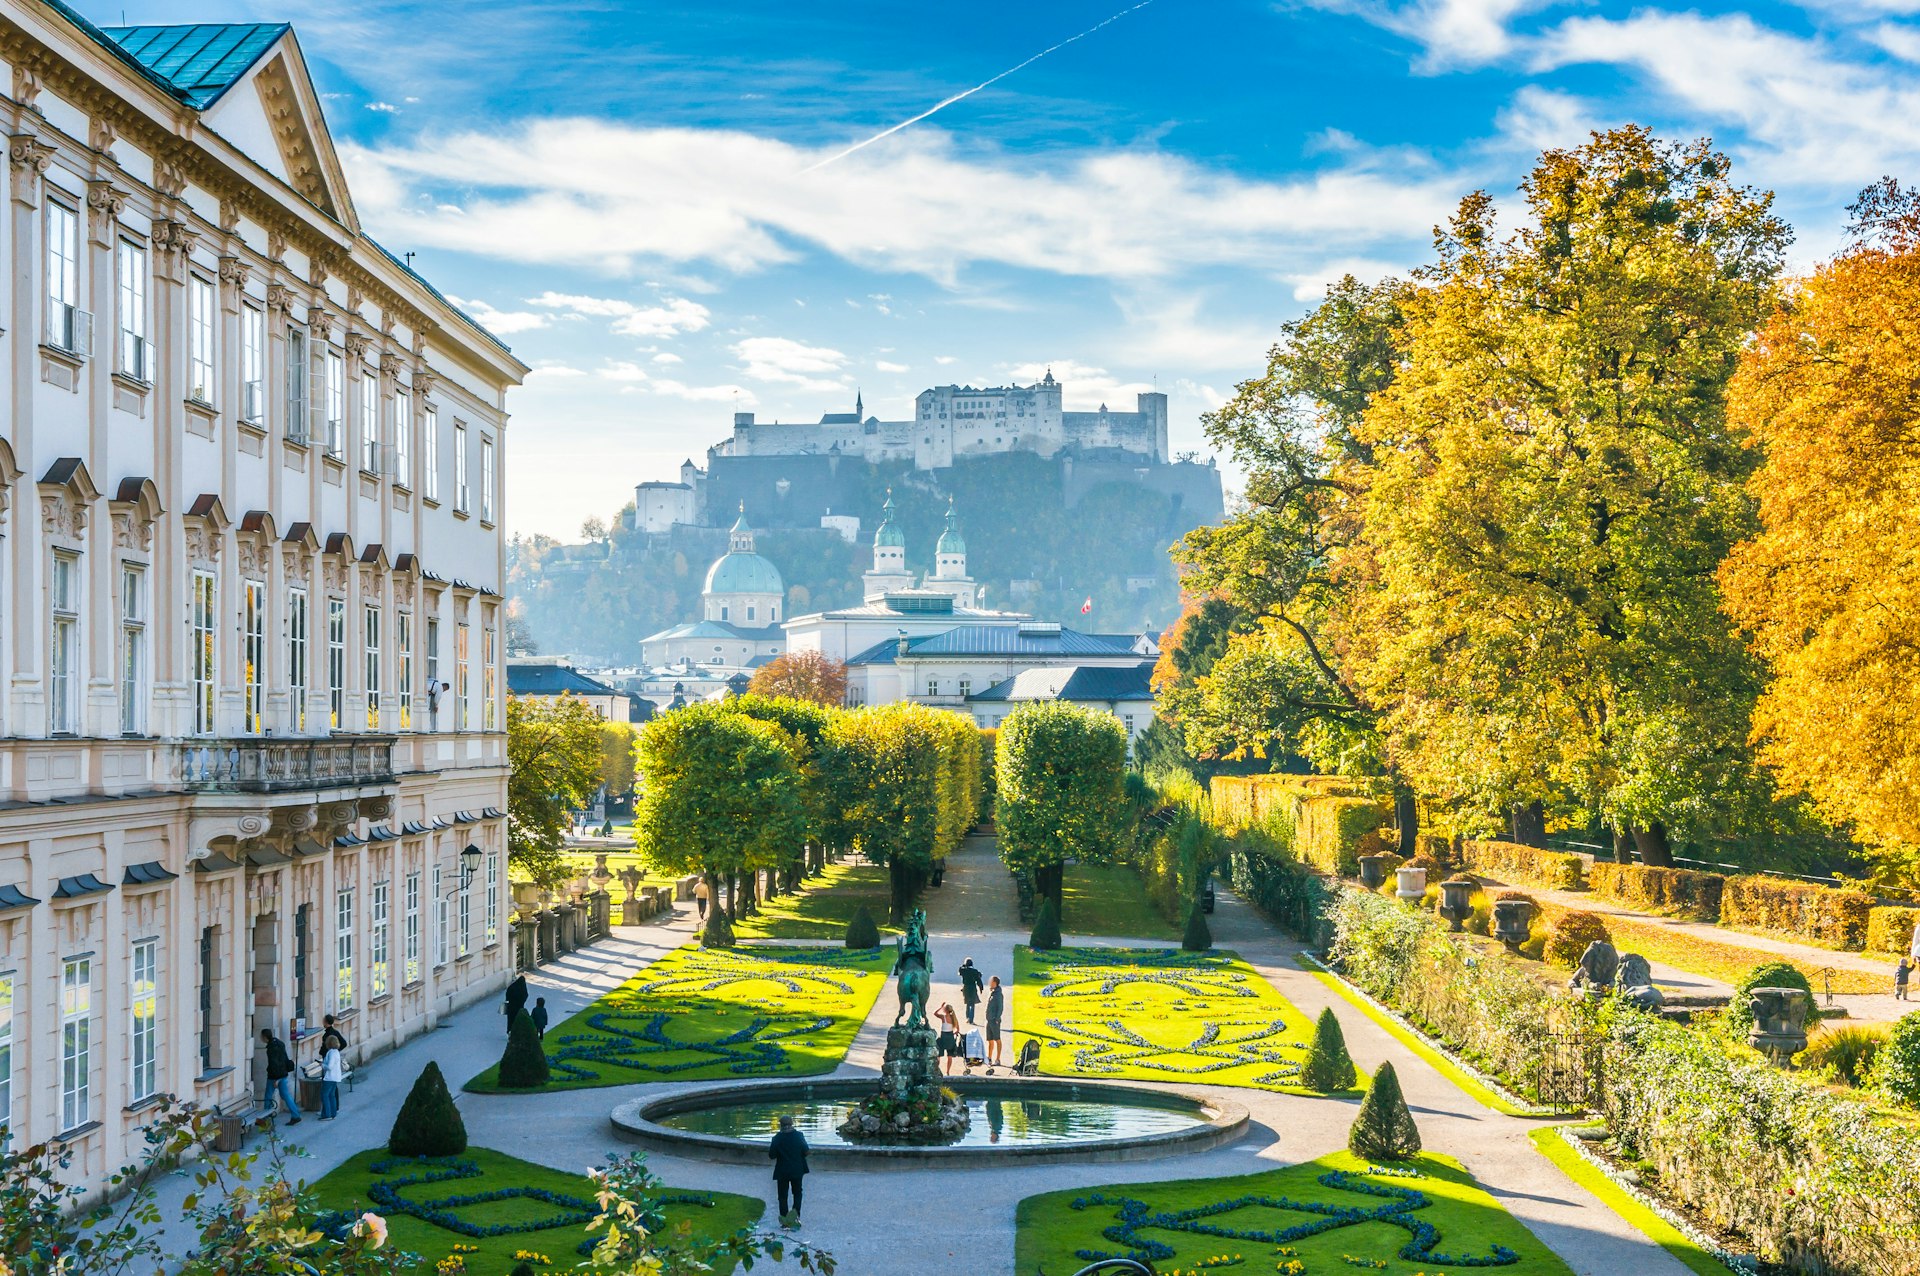 A view from Salzburg's Mirabell Gardens with the city's hilltop fortress in the background. The buildings are grand and white while the gardens are green and neatly manicured.